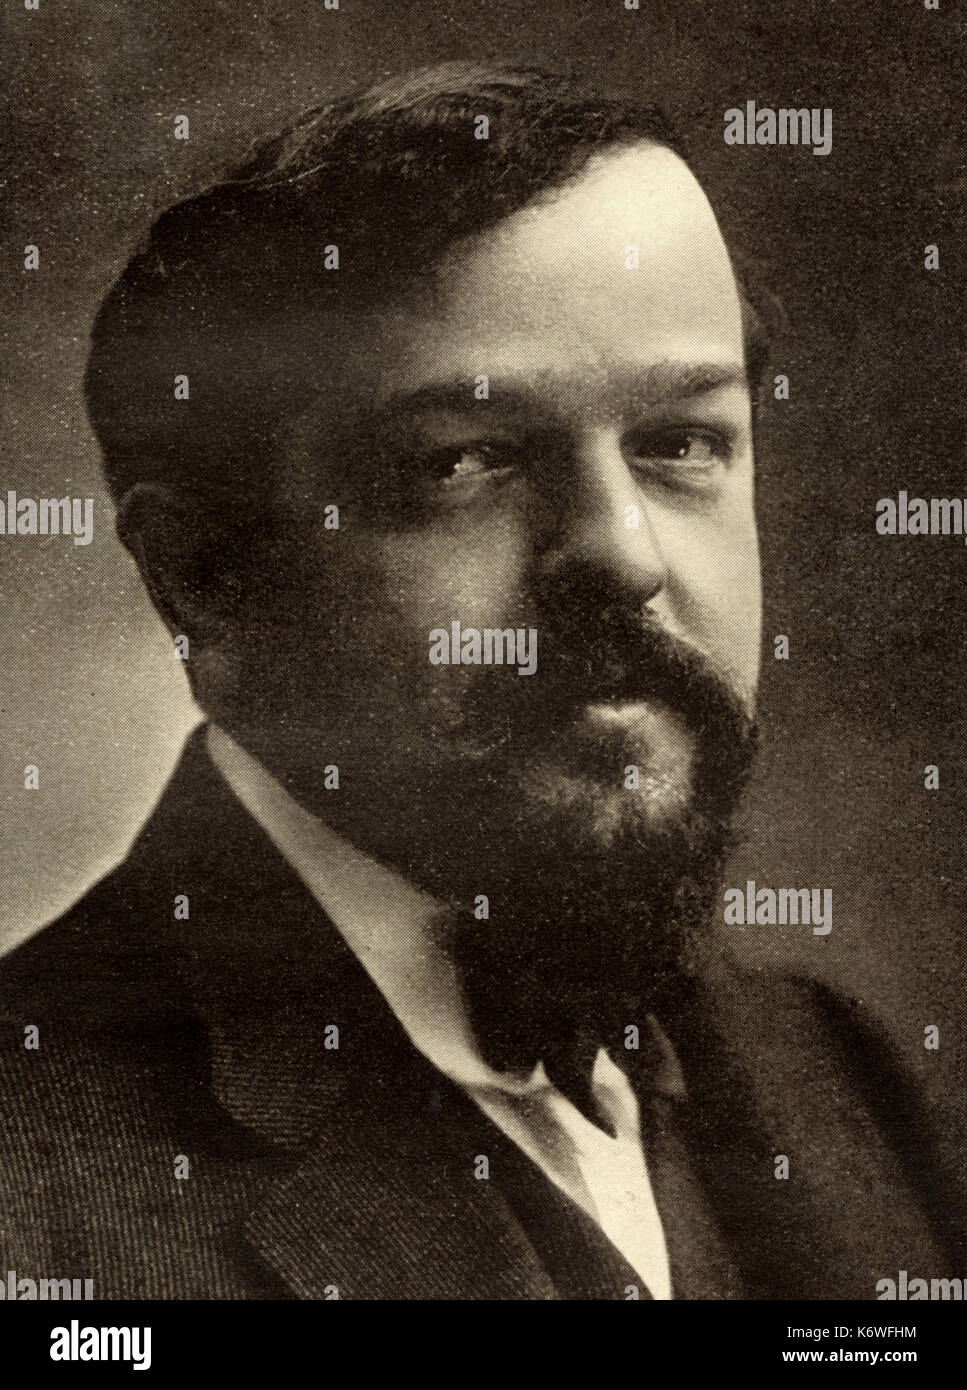 DEBUSSY, Claude - portrait French composer (1862-1918) Stock Photo